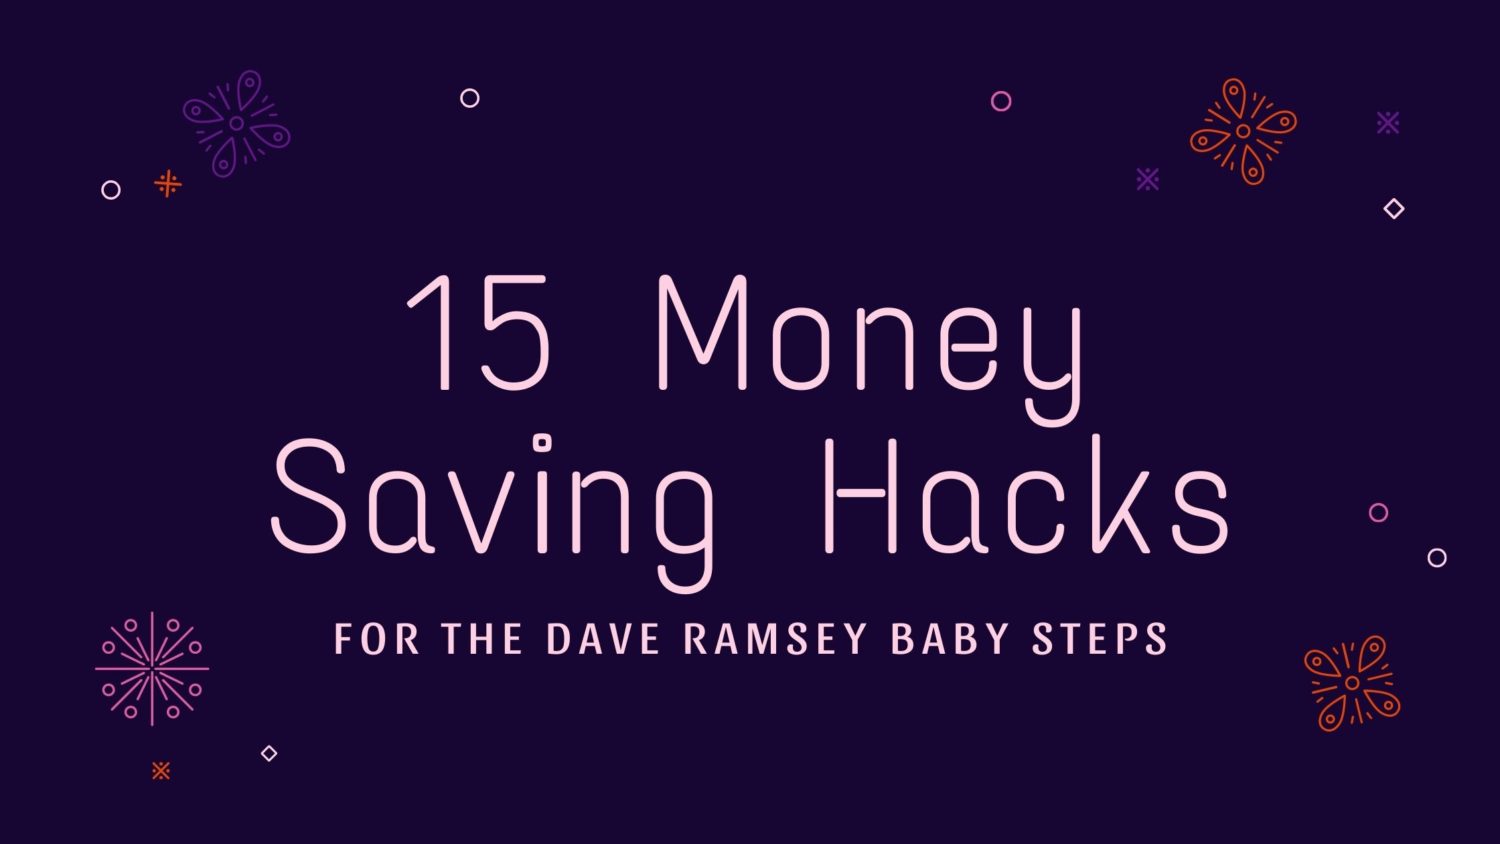 15-money-saving-hacks-to-help-with-the-dave-ramsey-baby-steps